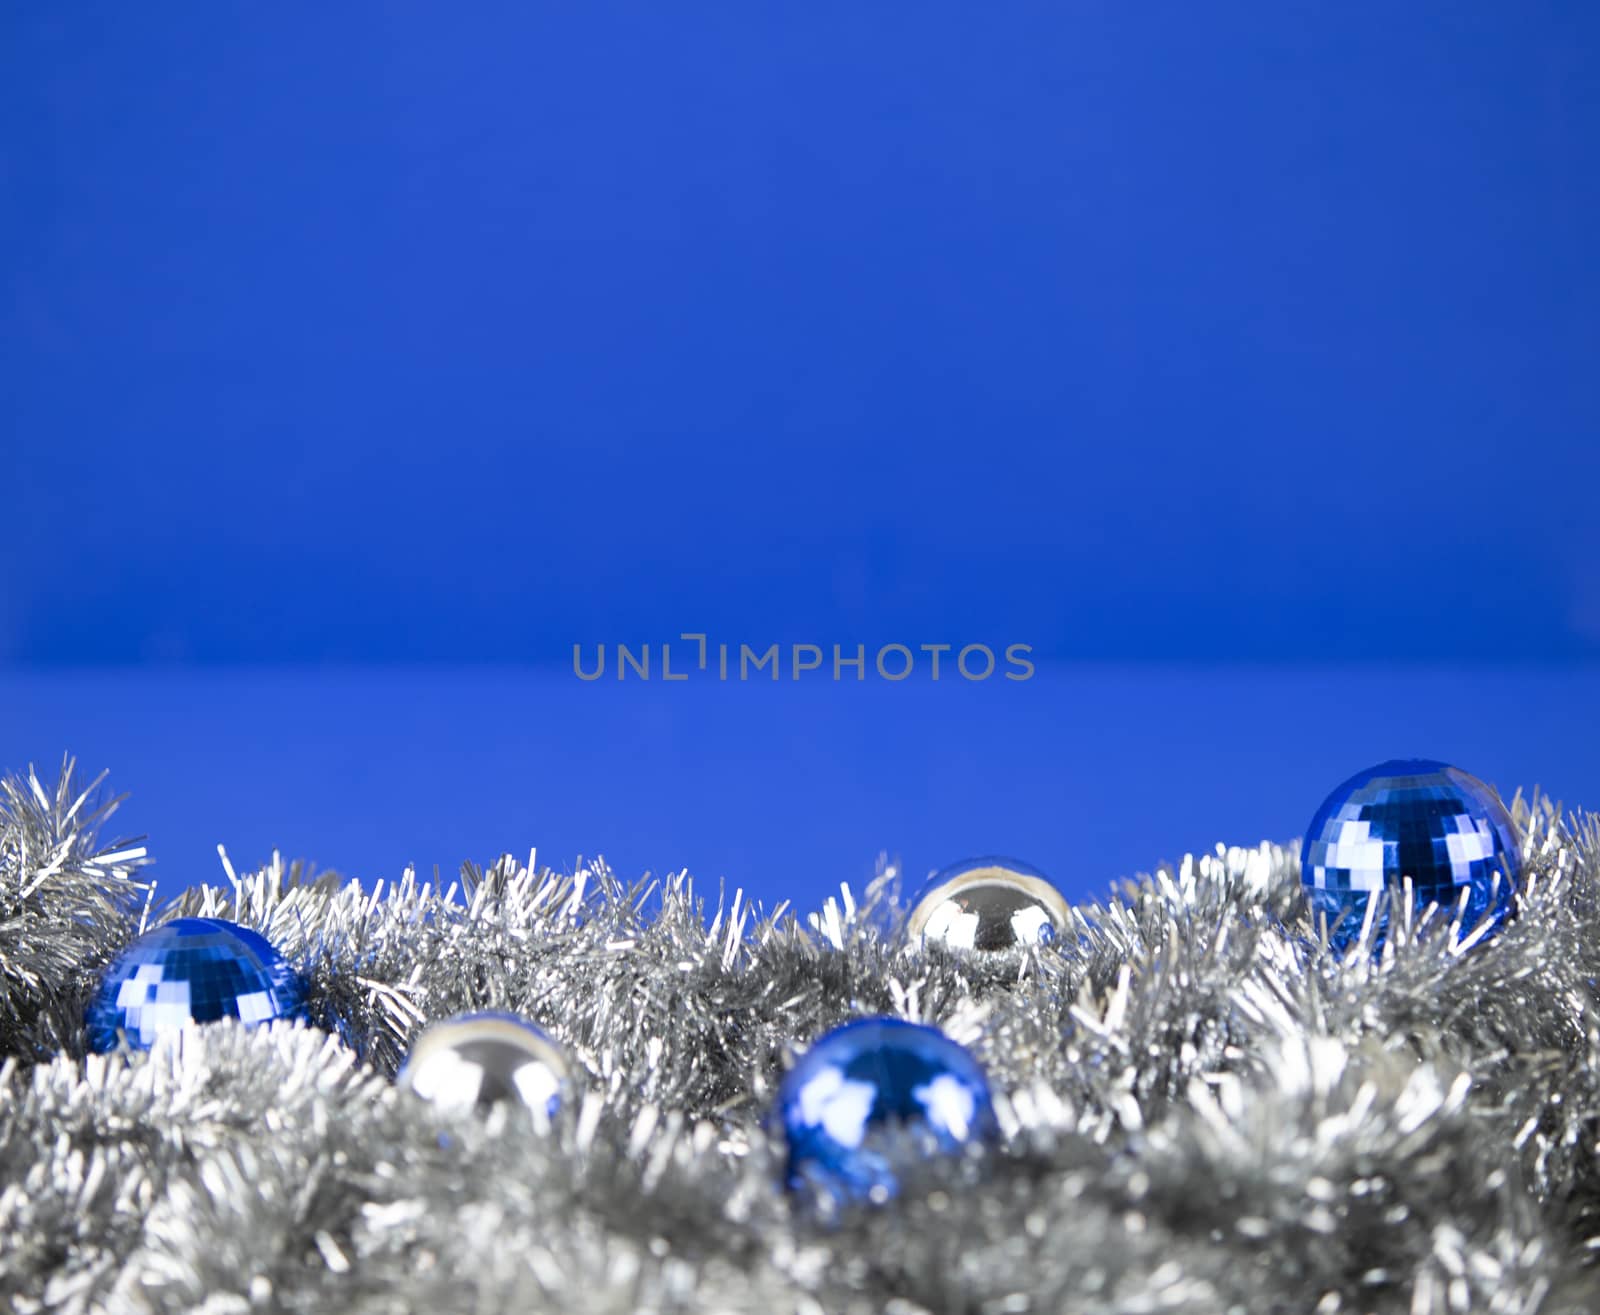 Christmas copy space with blue and silver bright baubles in silver decorative chain garland on blue background with bokeh effect by robbyfontanesi